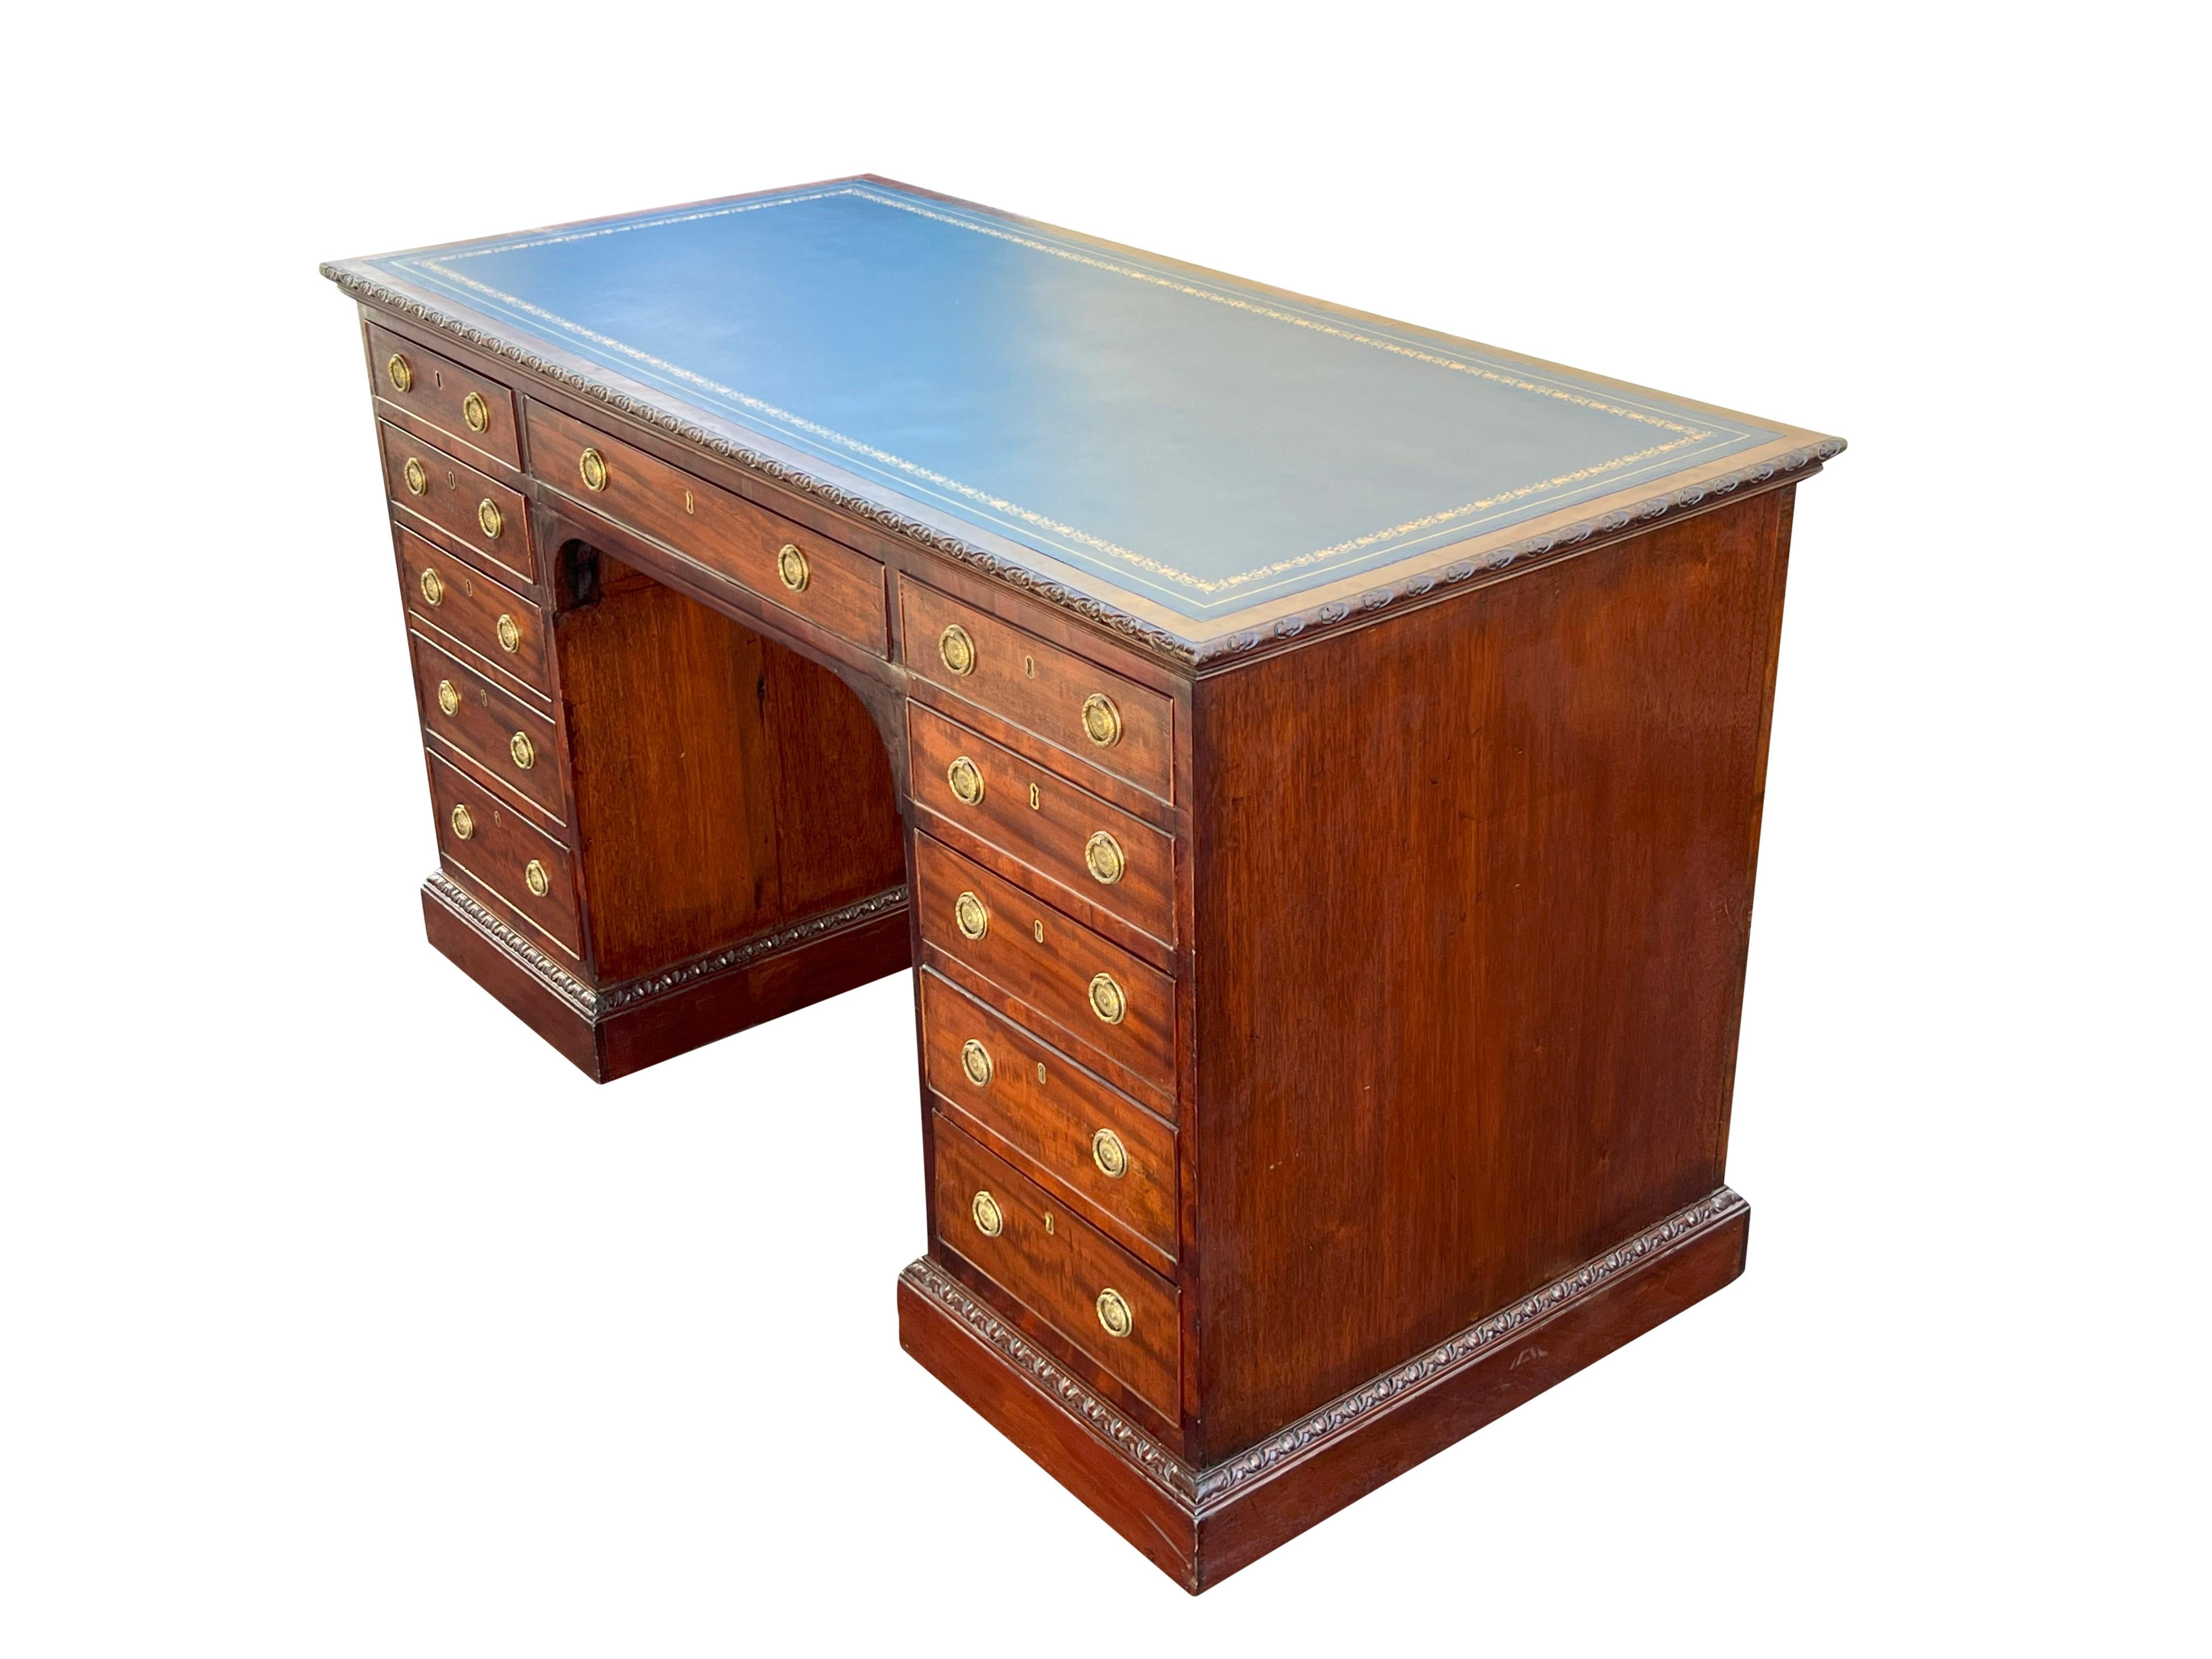 Rectangular top with new blue tooled leather inset and carved edge detail. Below a long drawer flanked by two small drawers over a kneehole with three drawers on one side and four on the other. Finished on back. From a Newport RI estate.